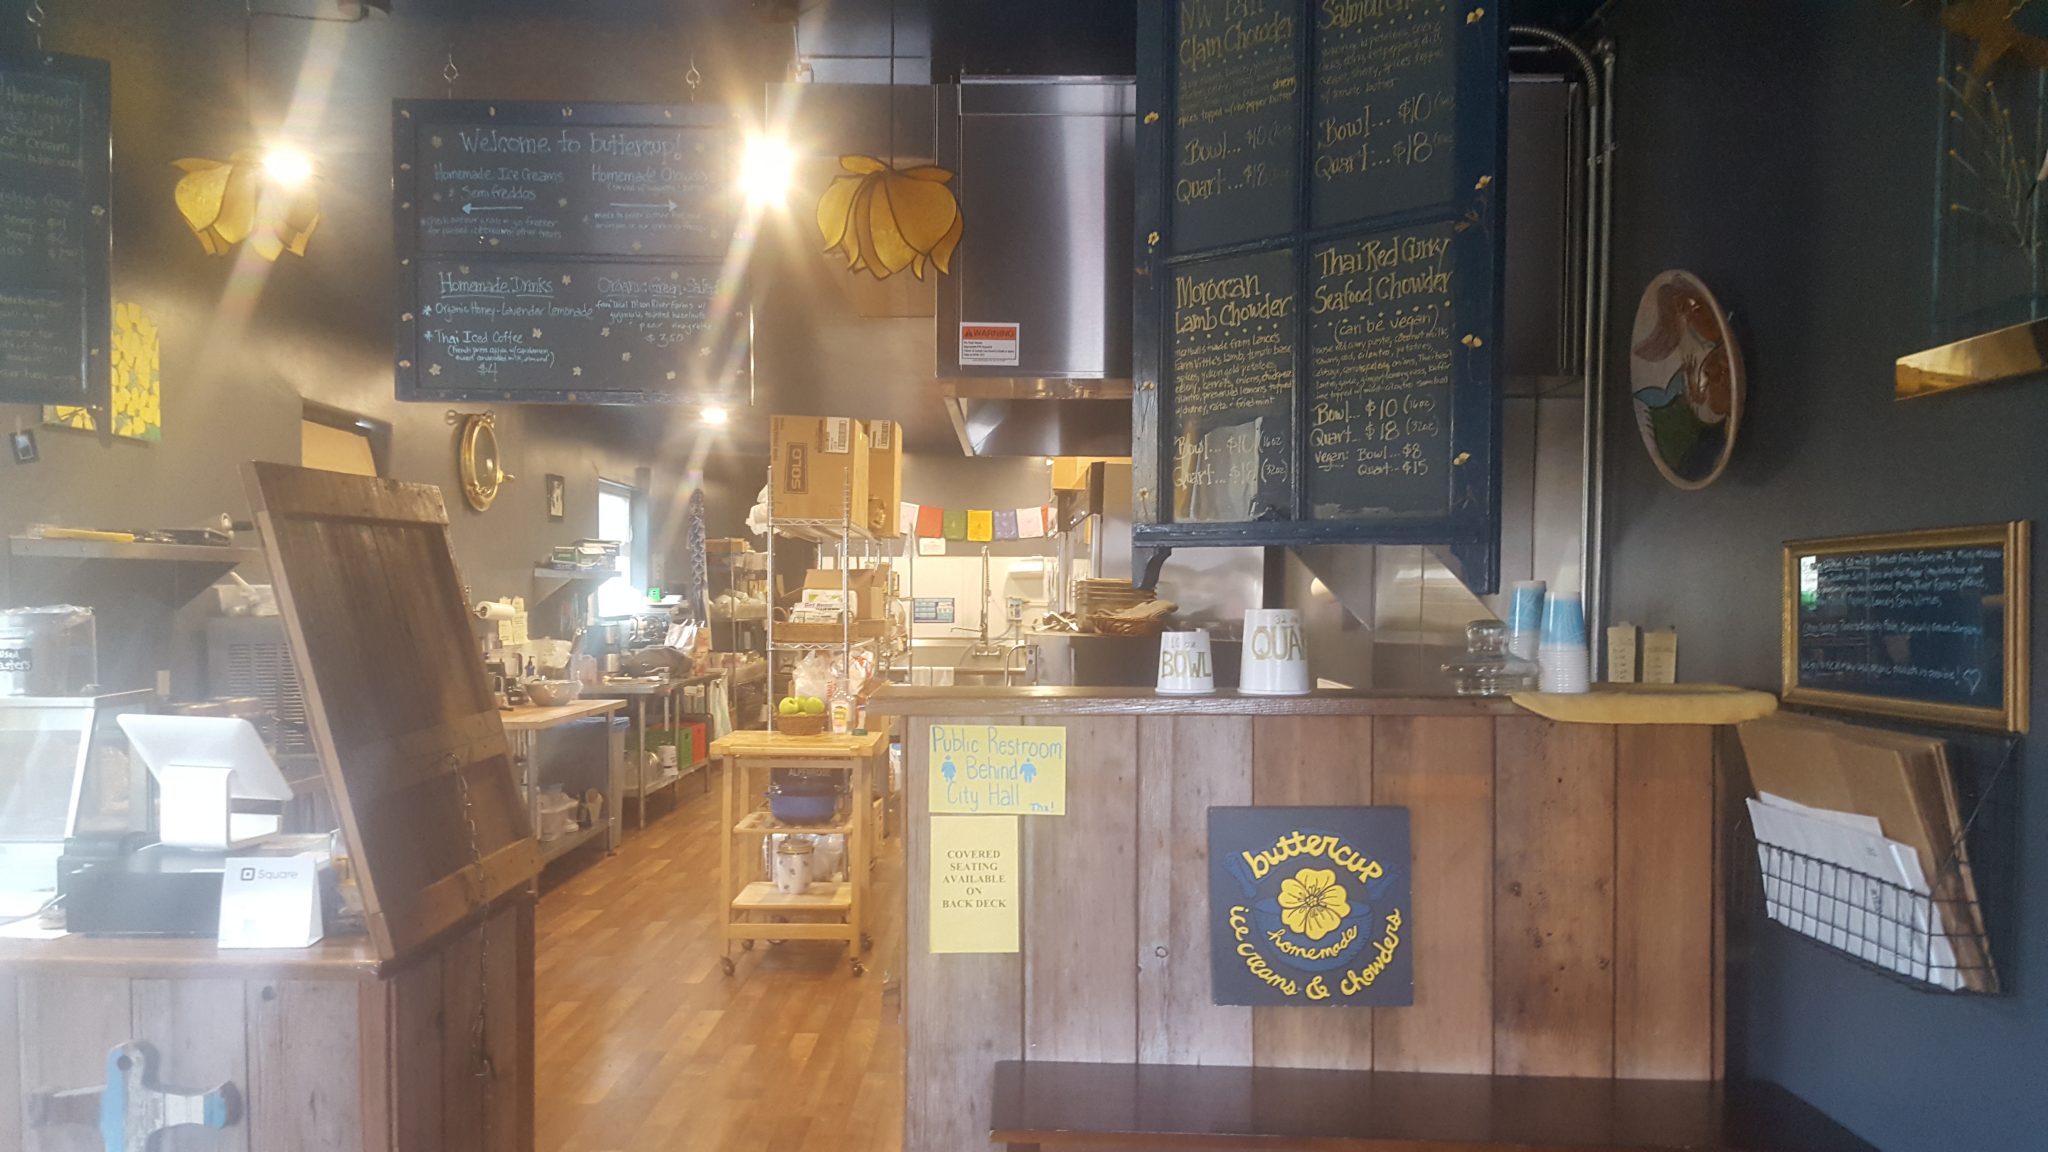 Inside of the Buttercup shop—counter for ordering with menus written on chalkboards overhead